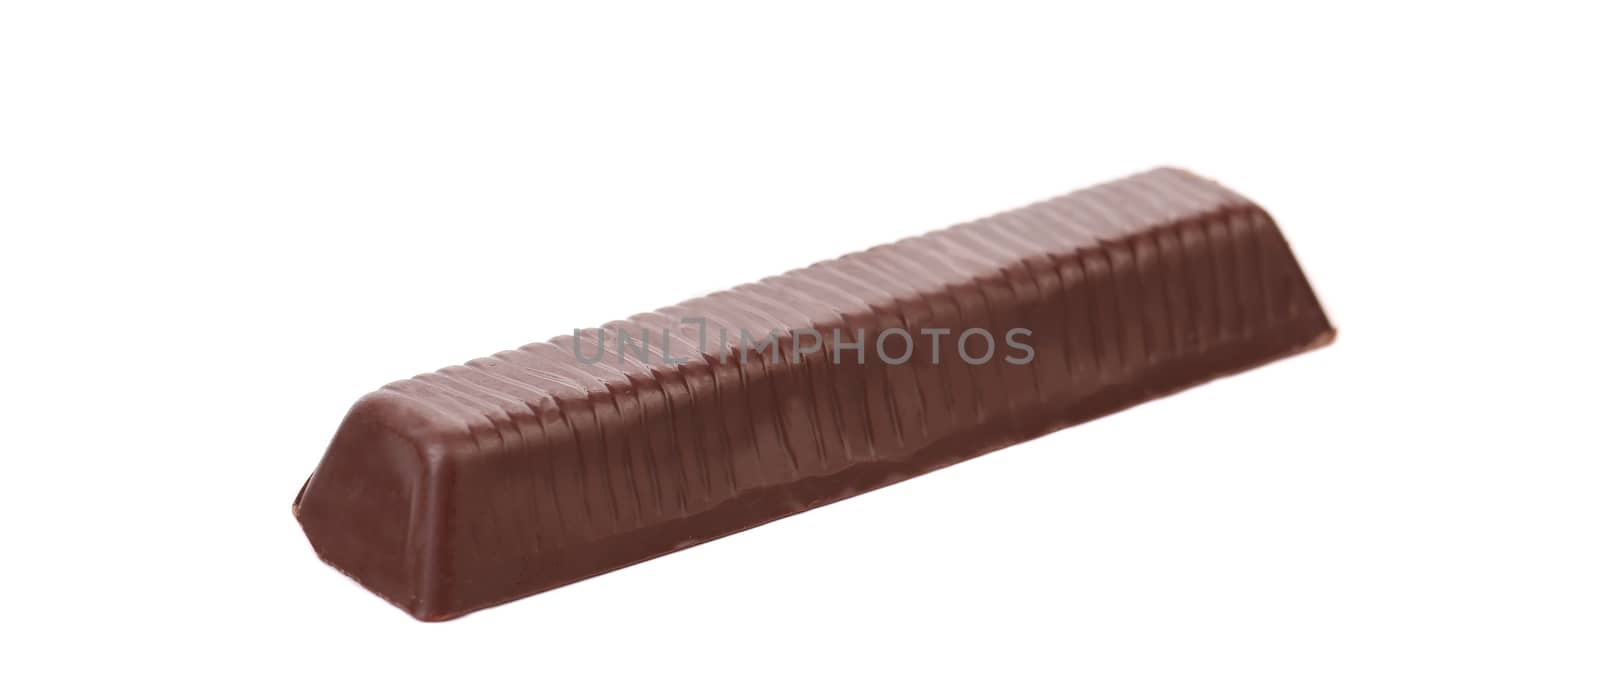 Black chocolate bar with filling. Isolated on a white background.